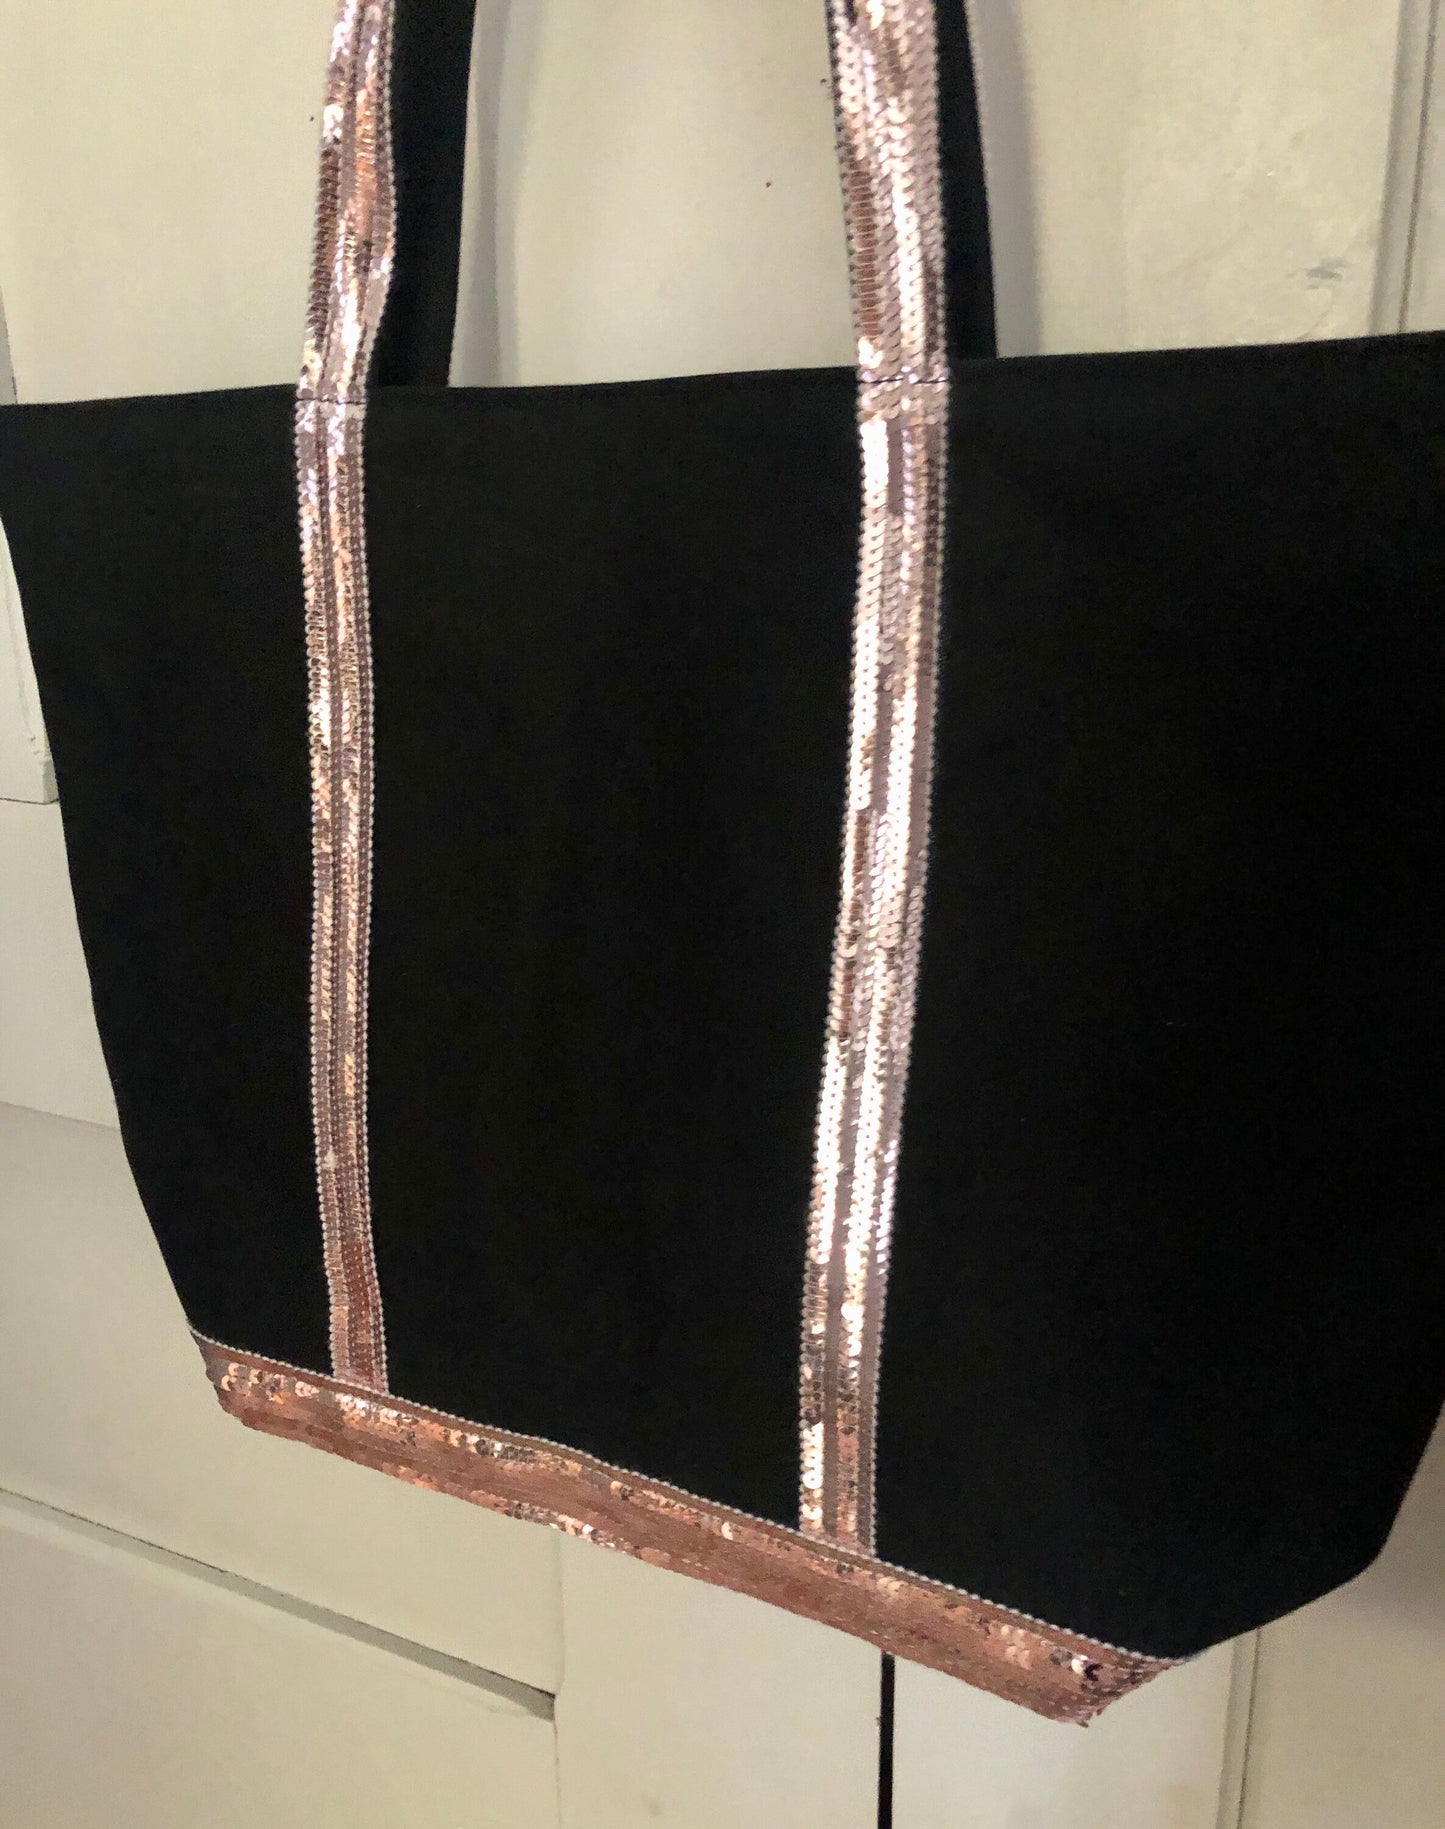 Black cotton canvas tote bag with pale pink sequins